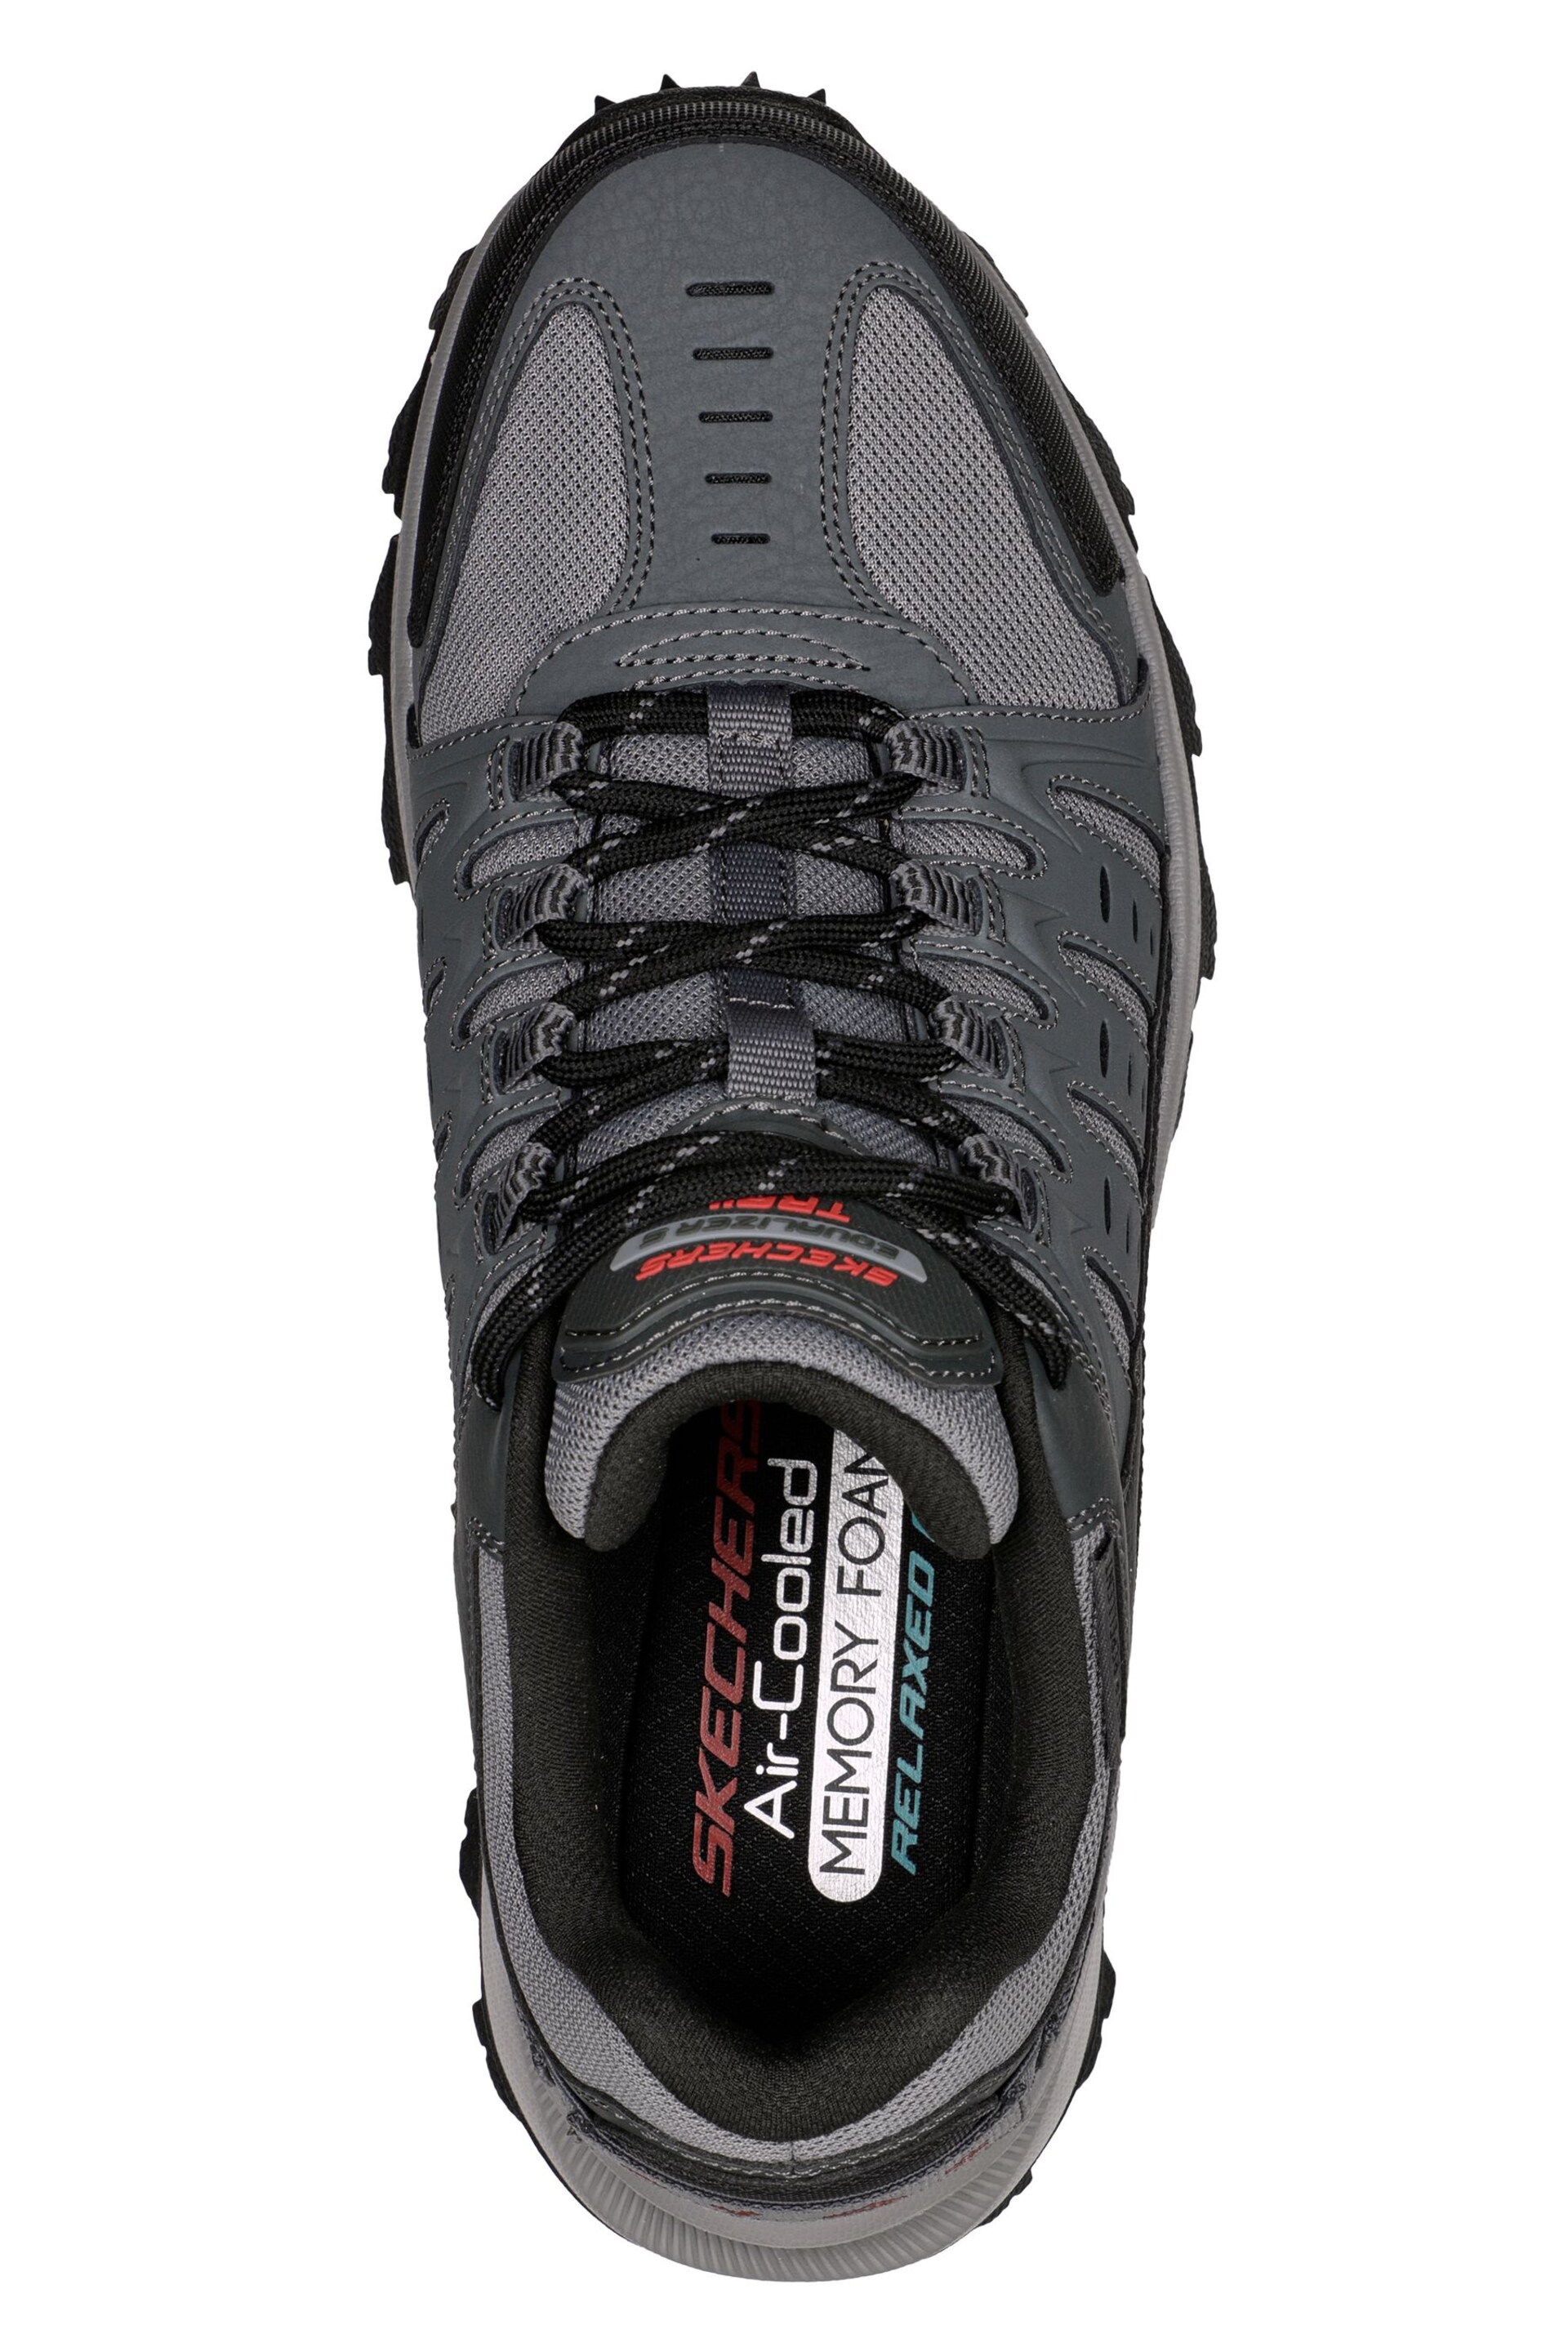 Skechers Grey Equalizer 5.0 Solix Trail Running Trainers - Image 4 of 5